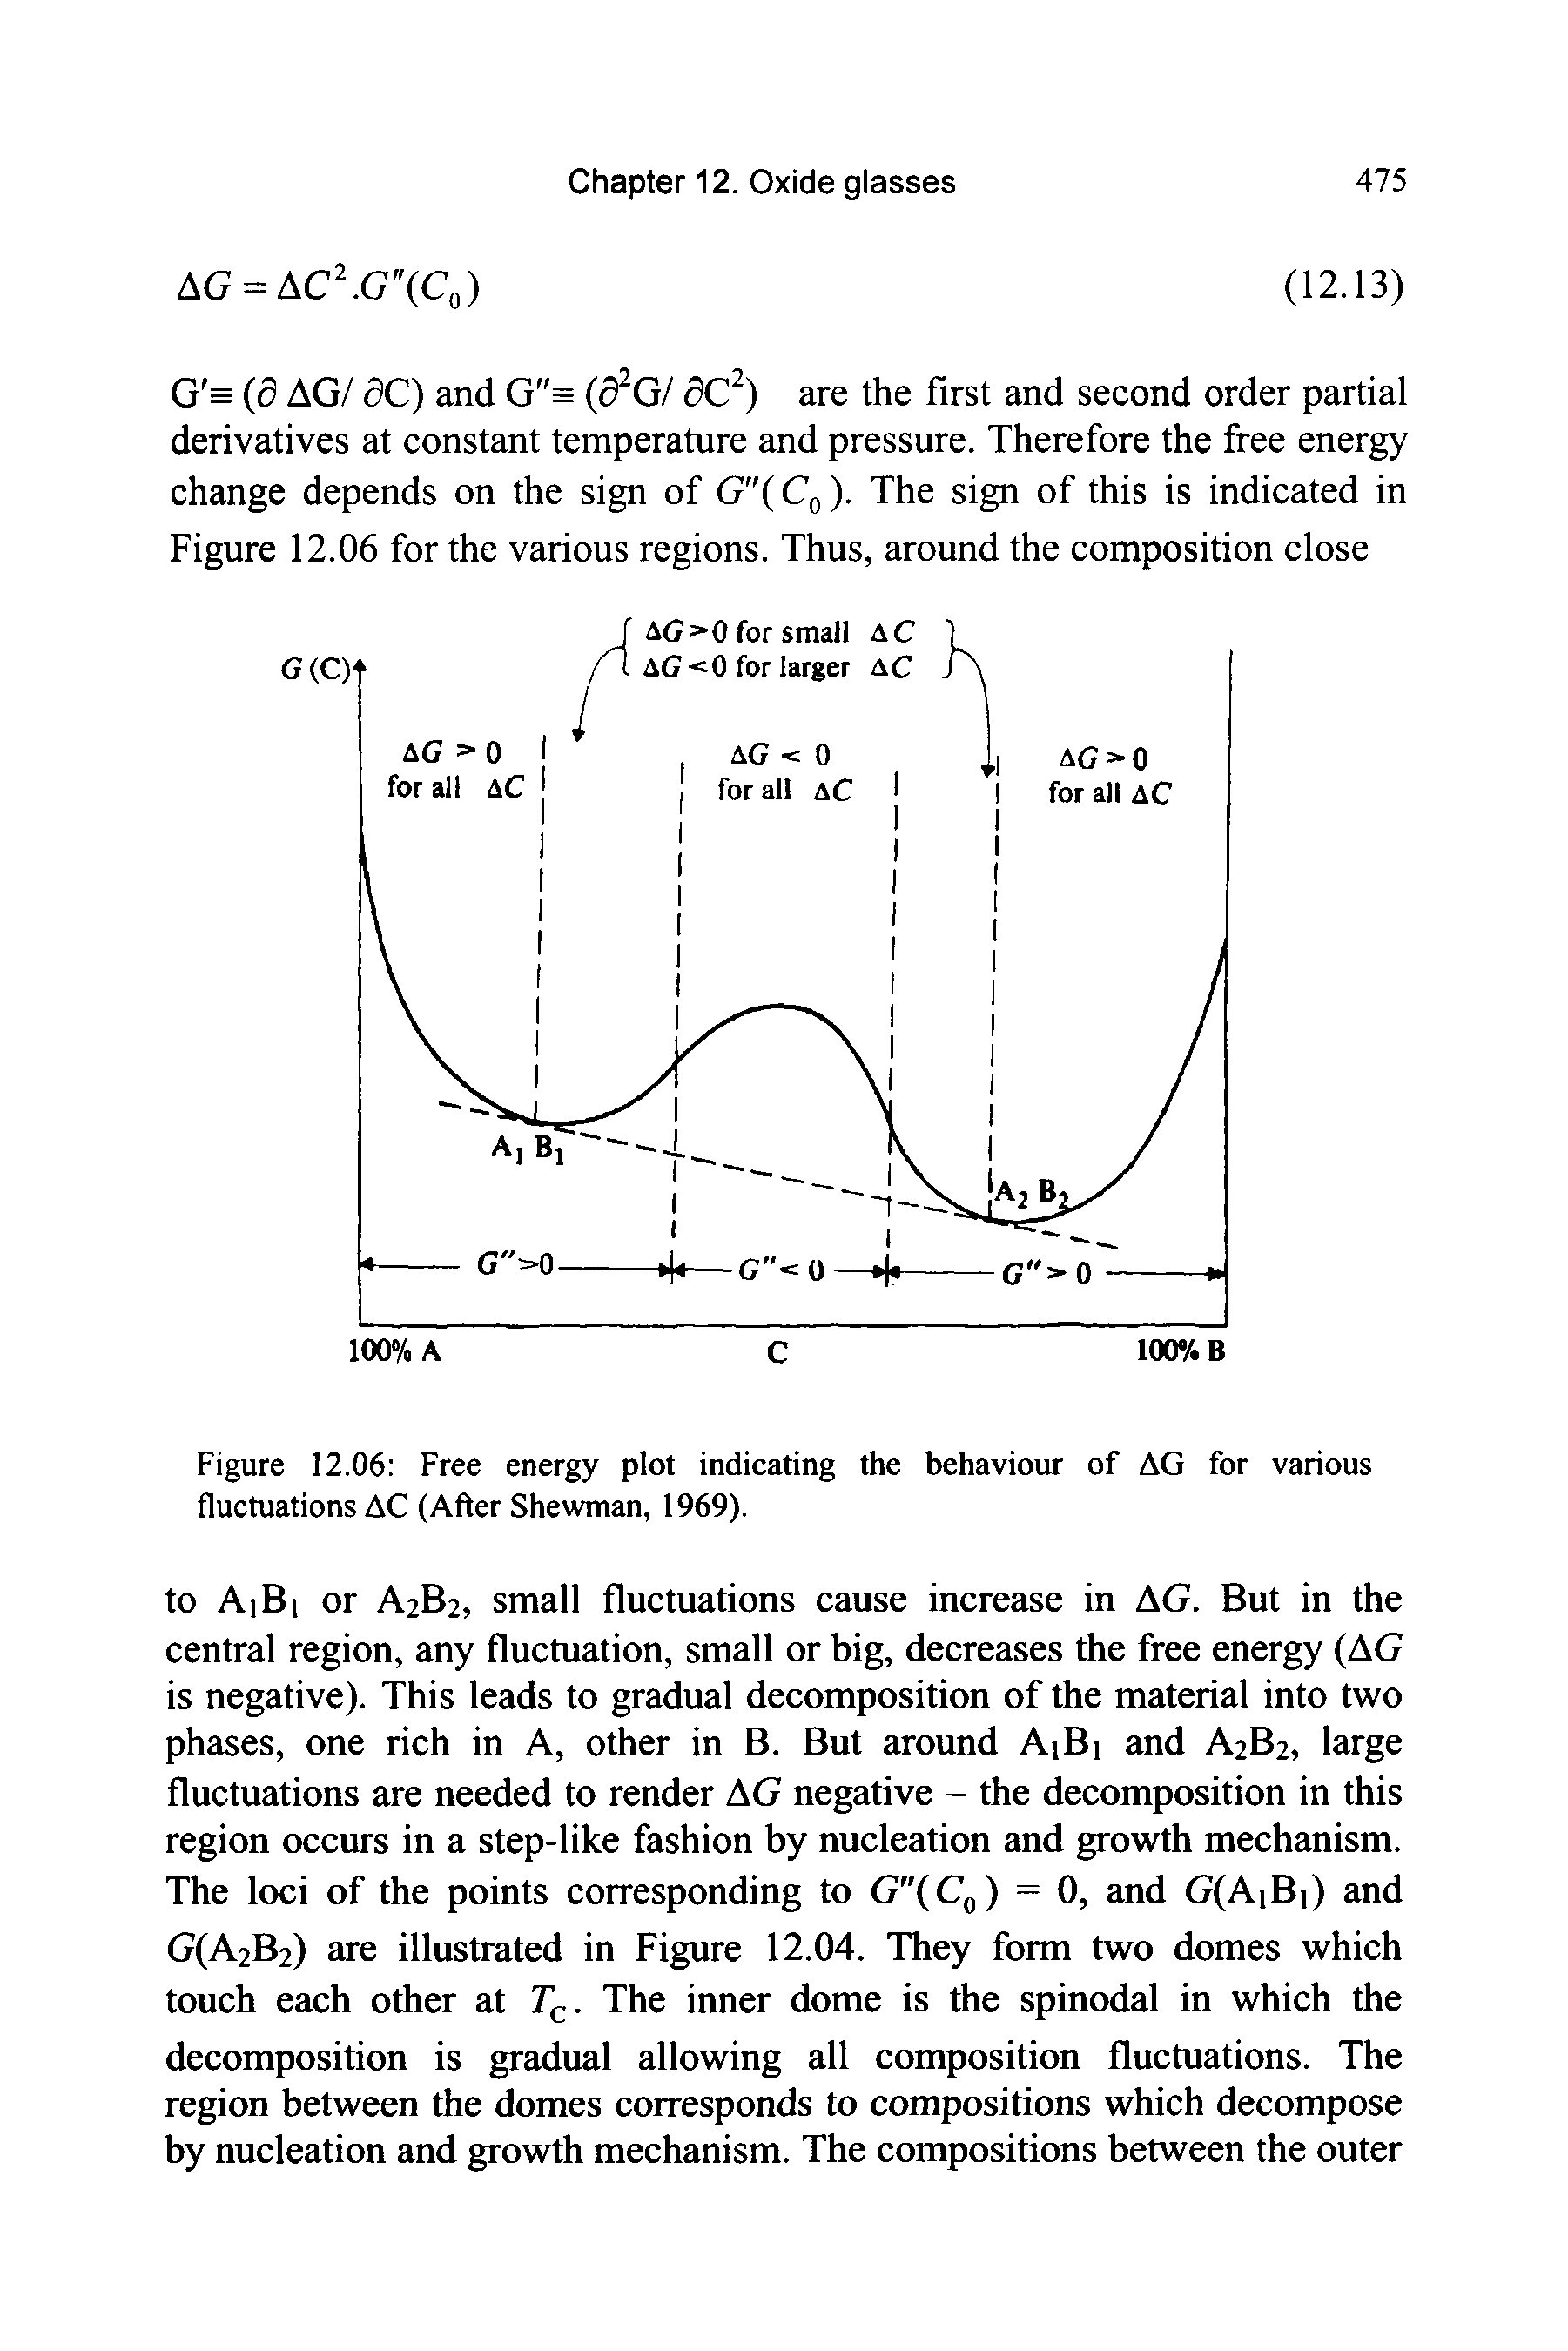 Figure 12.06 Free energy plot indicating the behaviour of AG for various fluctuations AC (After Shewman, 1969).